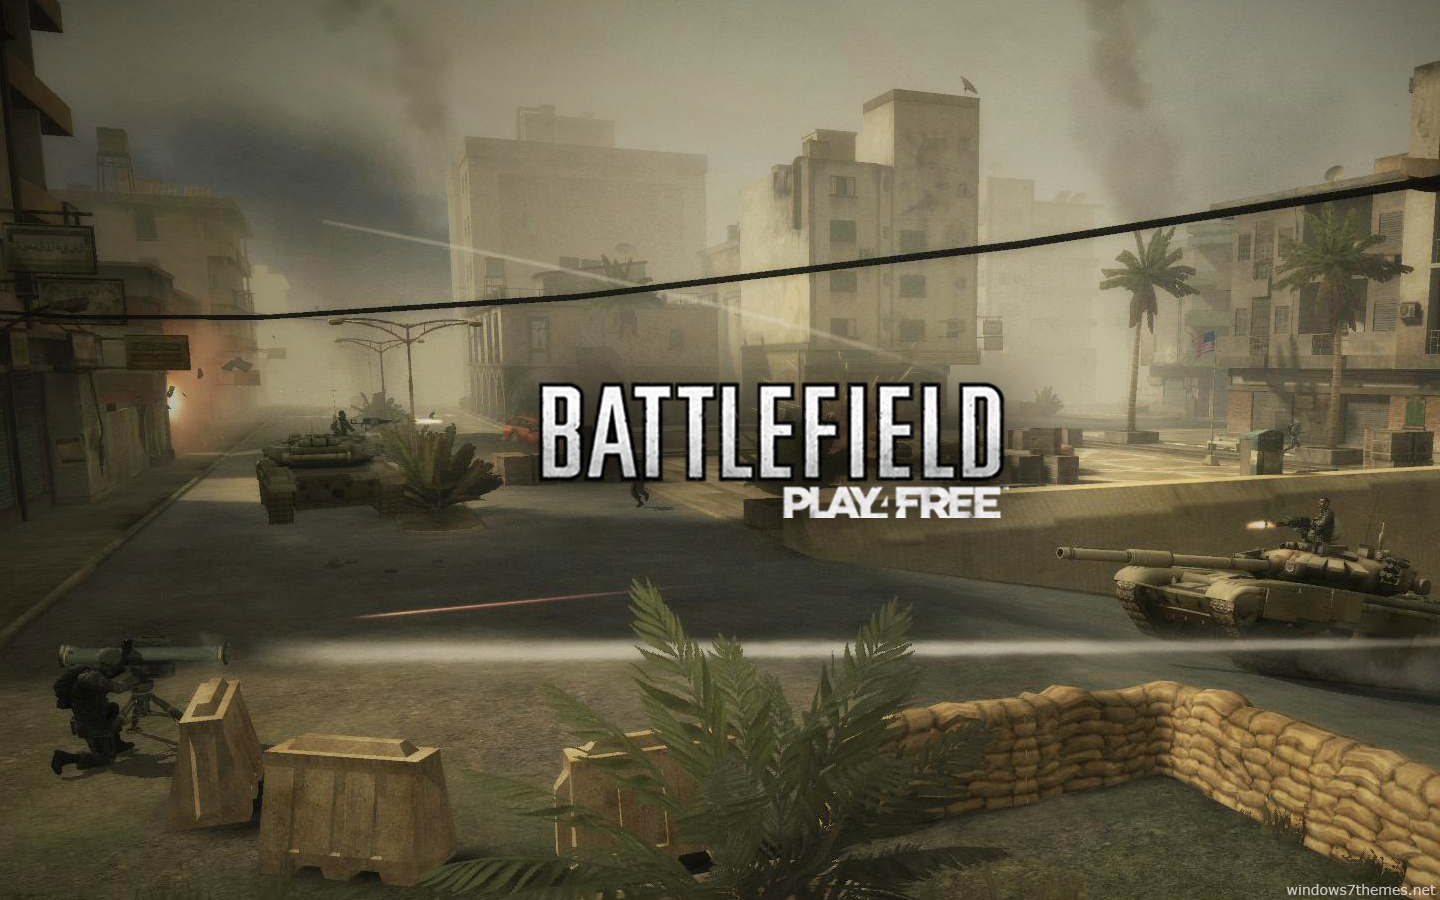 Currently all Battlefield Play4Free wallpapers are only available as